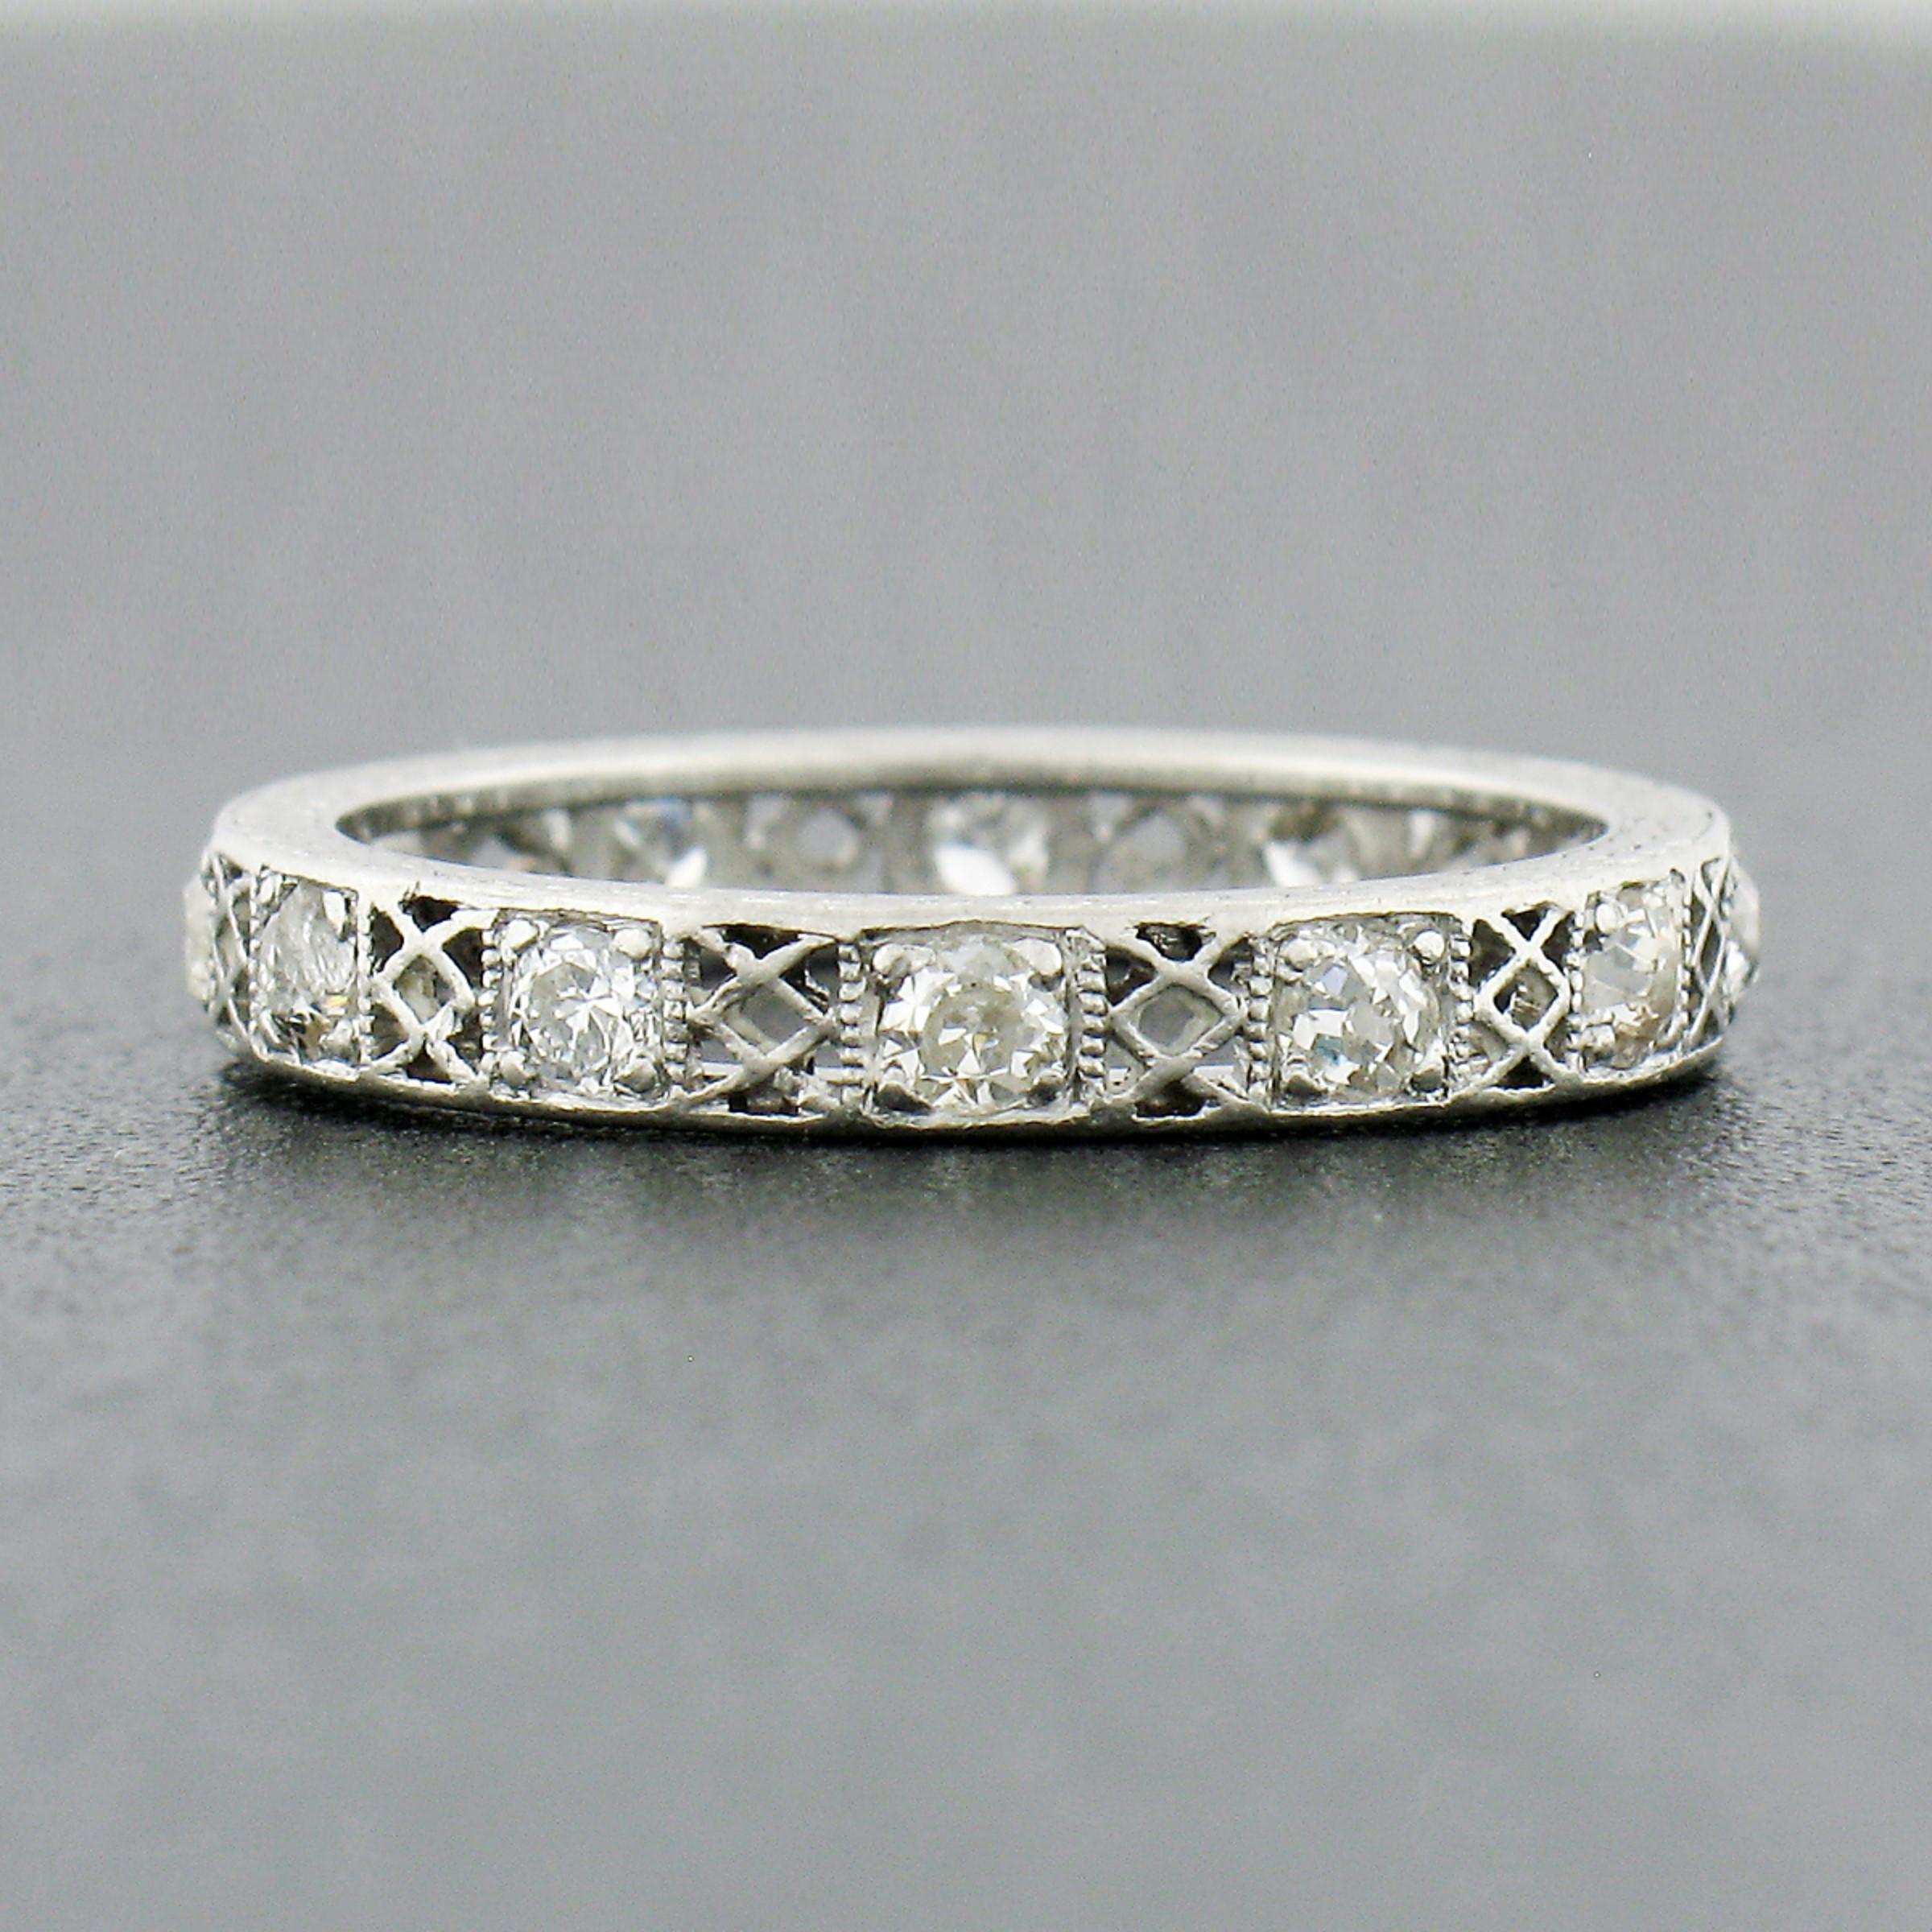 This RARE antique diamond eternity band ring was crafted from solid platinum during the art deco period. It features an alternating pattern of old European and old single cut diamonds neatly set throughout with open filigree work in between, giving